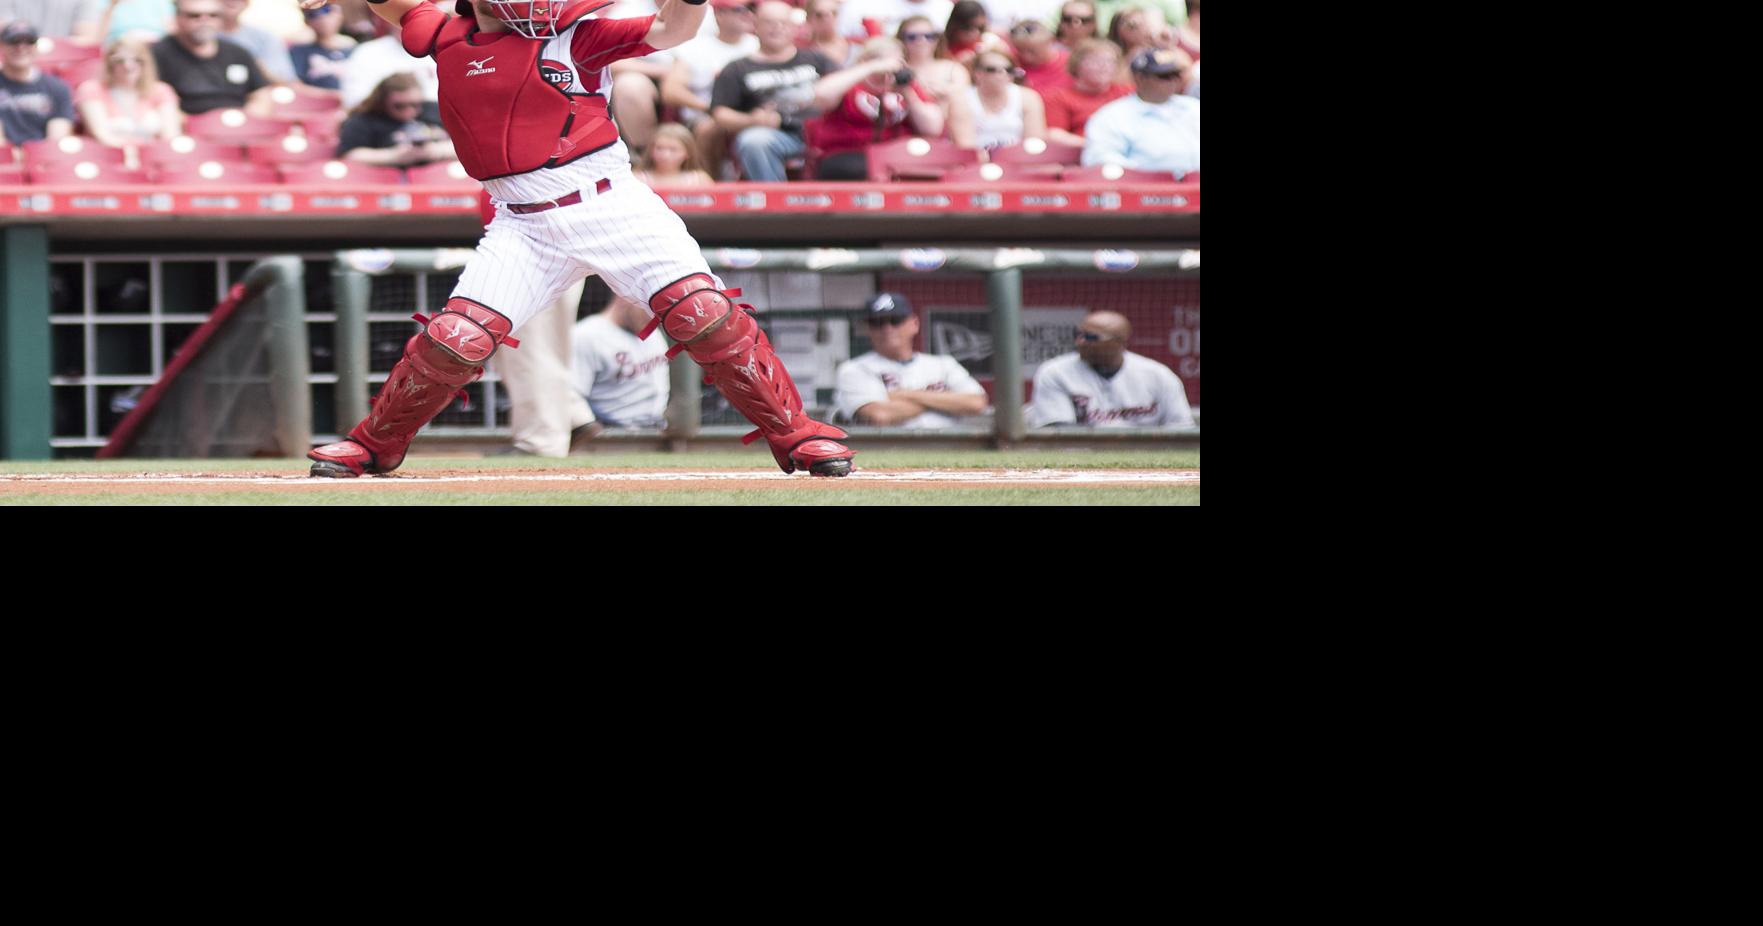 Player Preview: Tucker Barnhart brings experience and stability behind the  plate - Bless You Boys